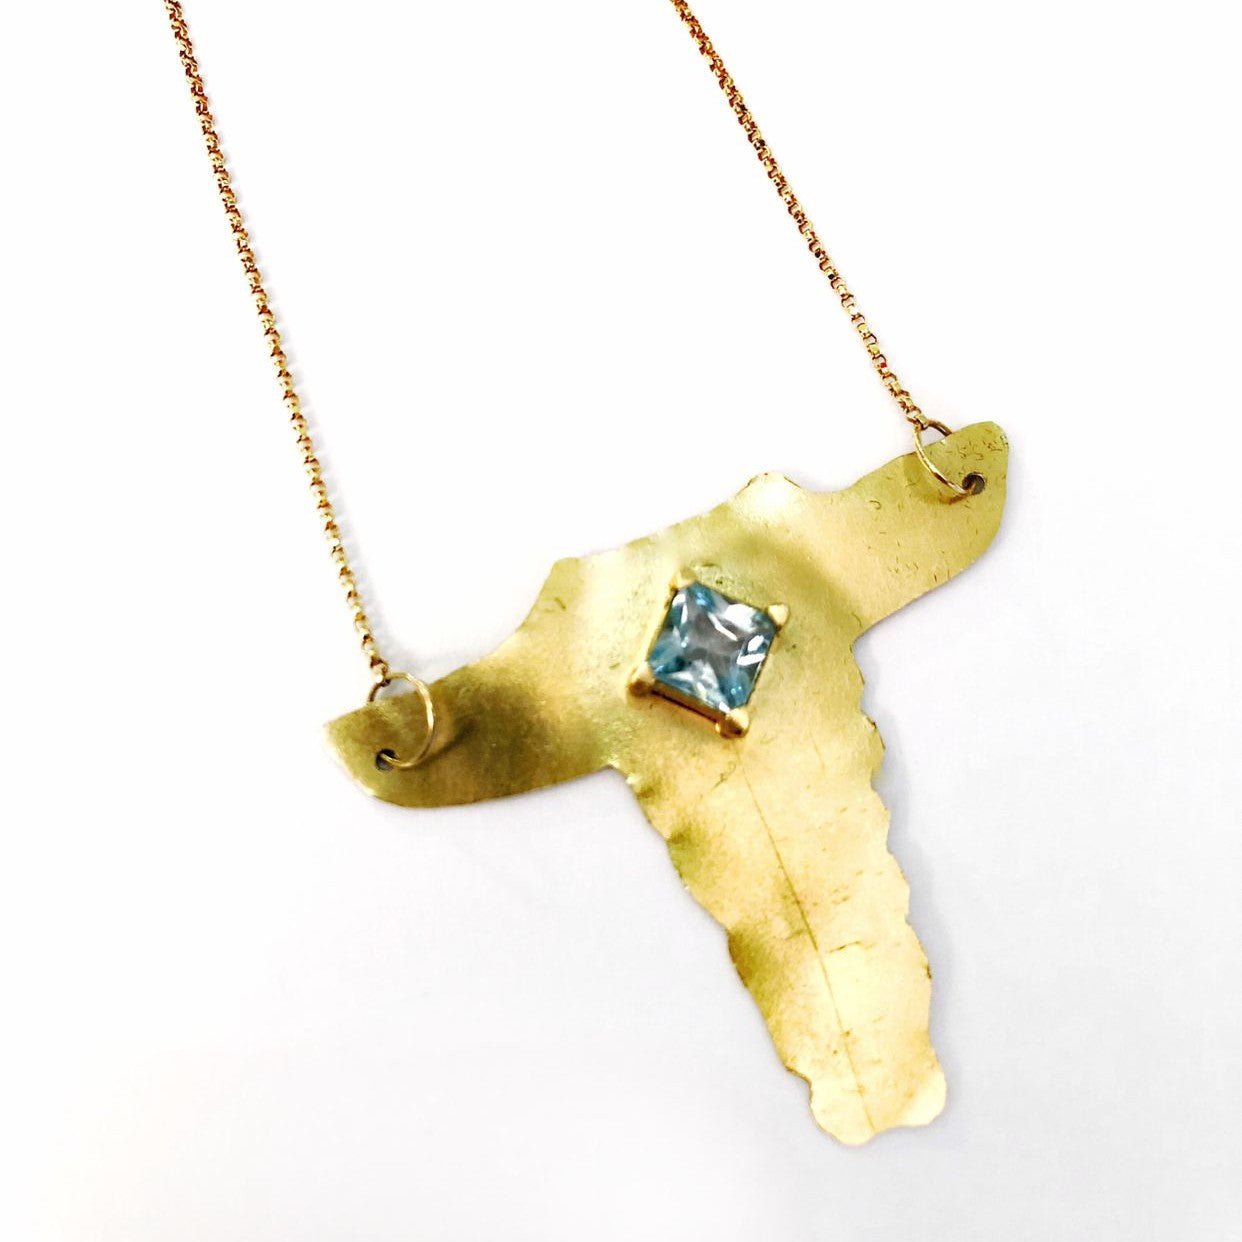 18k Gold Bull Necklace with vintage Natural Aquamarine, one of a kind design by nadine mouzannar